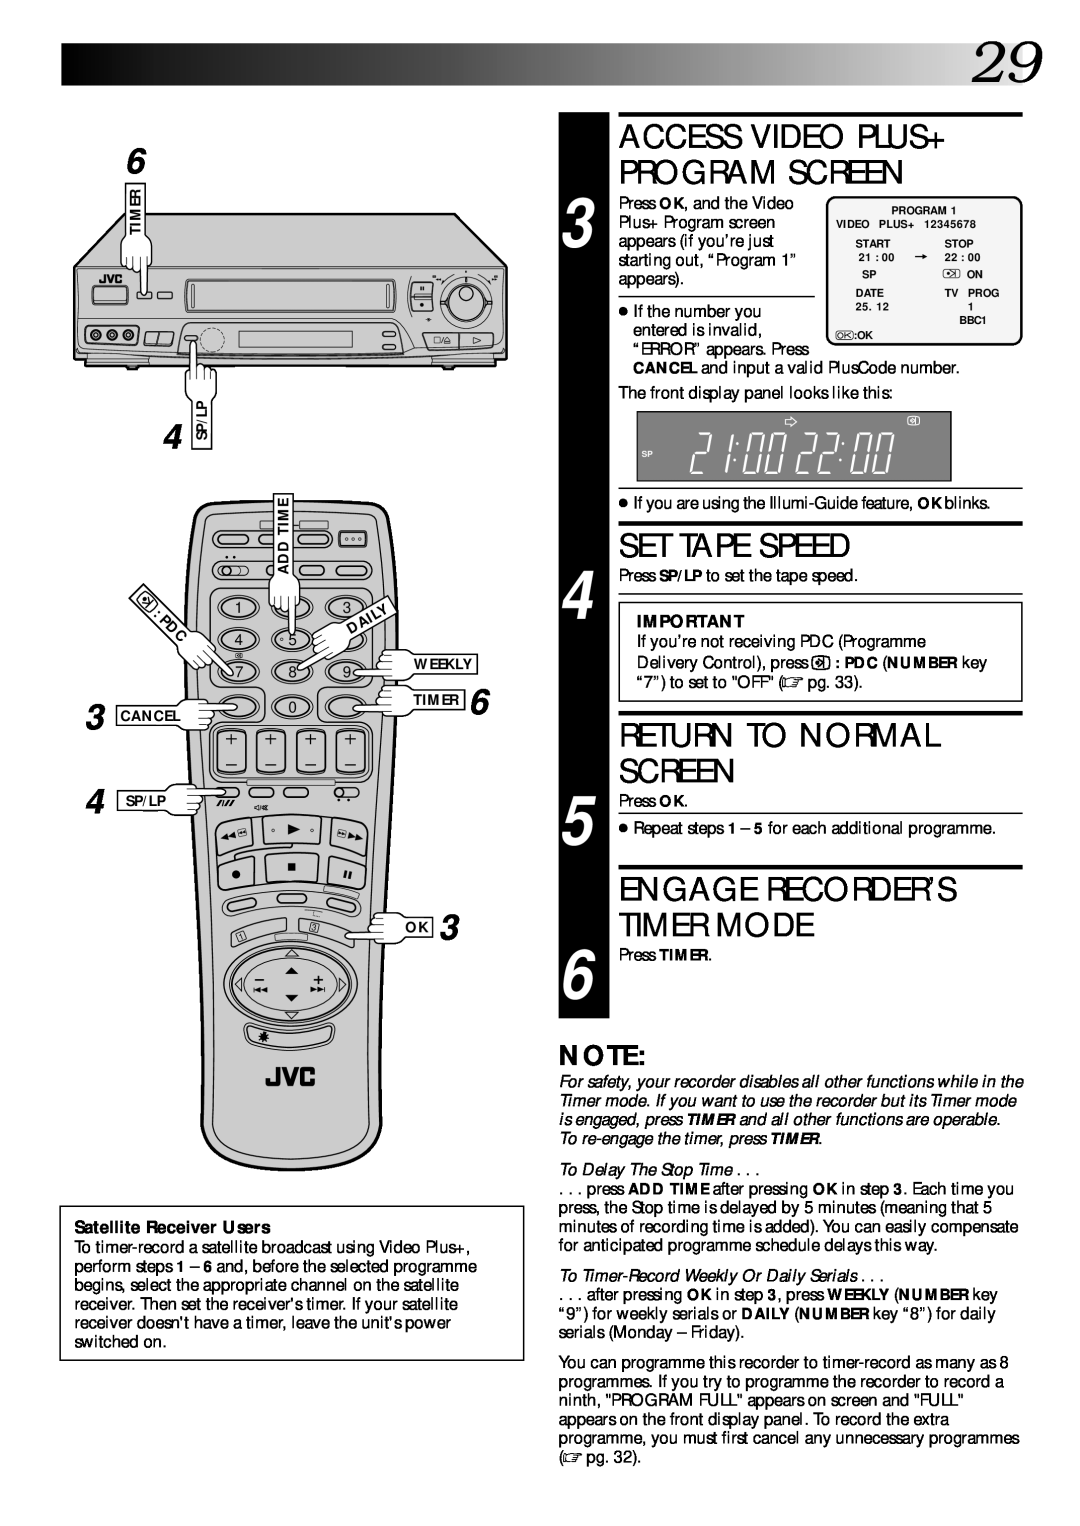 JVC PU30425 Engage Recorder’S, Timer Mode, Access Video Plus+, Program Screen, Set Tape Speed, Return To Normal, appears 